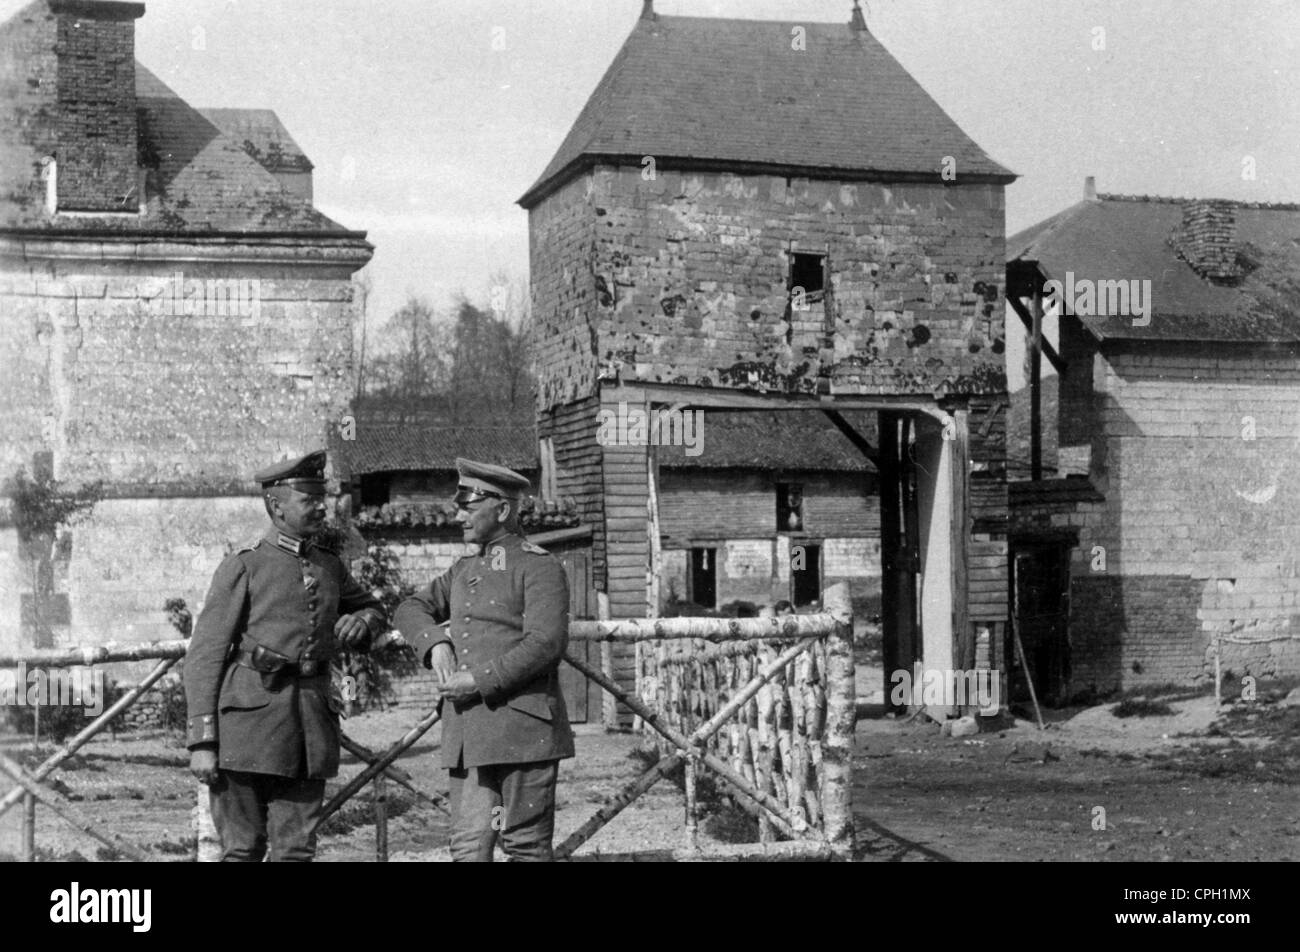 events, First World War / WWI, Western Front 1915 - 1918, German military officers in Mont Saint Remy, France, 1.5.1916, Mont-Saint-Remy, officers, 20th century, historic, historical, 1910s, 10s, army, military, Germany, German Reich, Empire, occupation, rear area, city gate, soldiers, soldier, officer, people, Additional-Rights-Clearences-Not Available Stock Photo